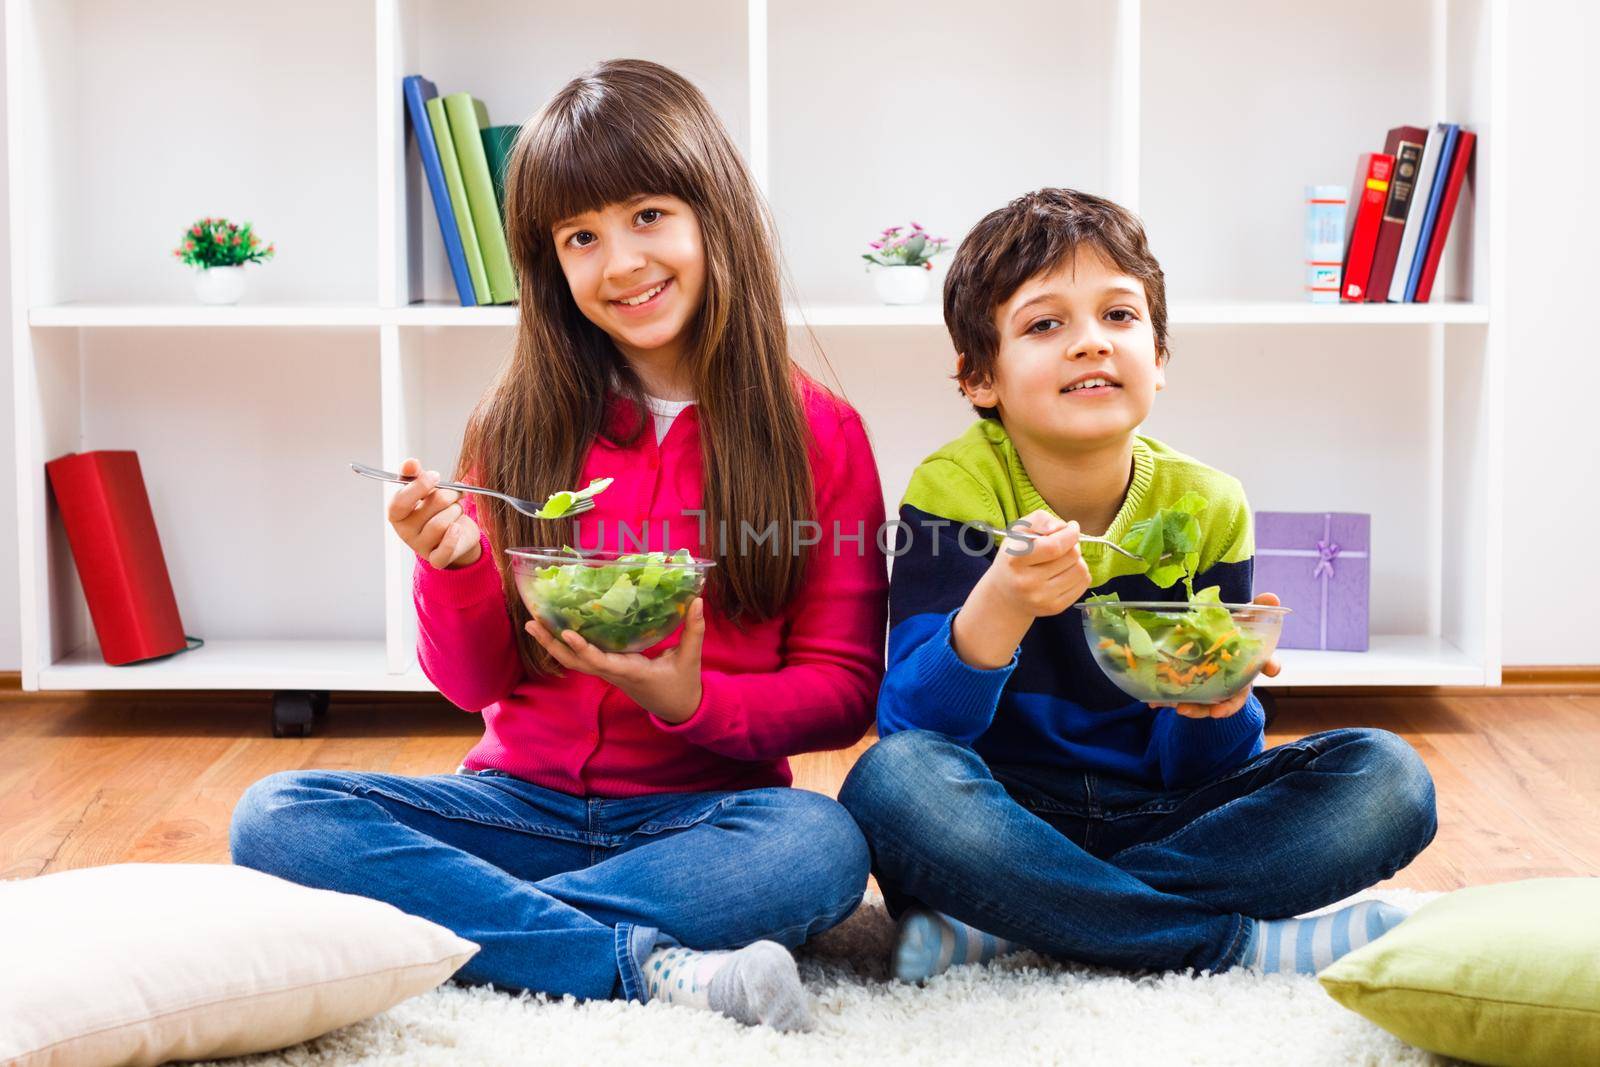 Image of kids eating healthy at home.